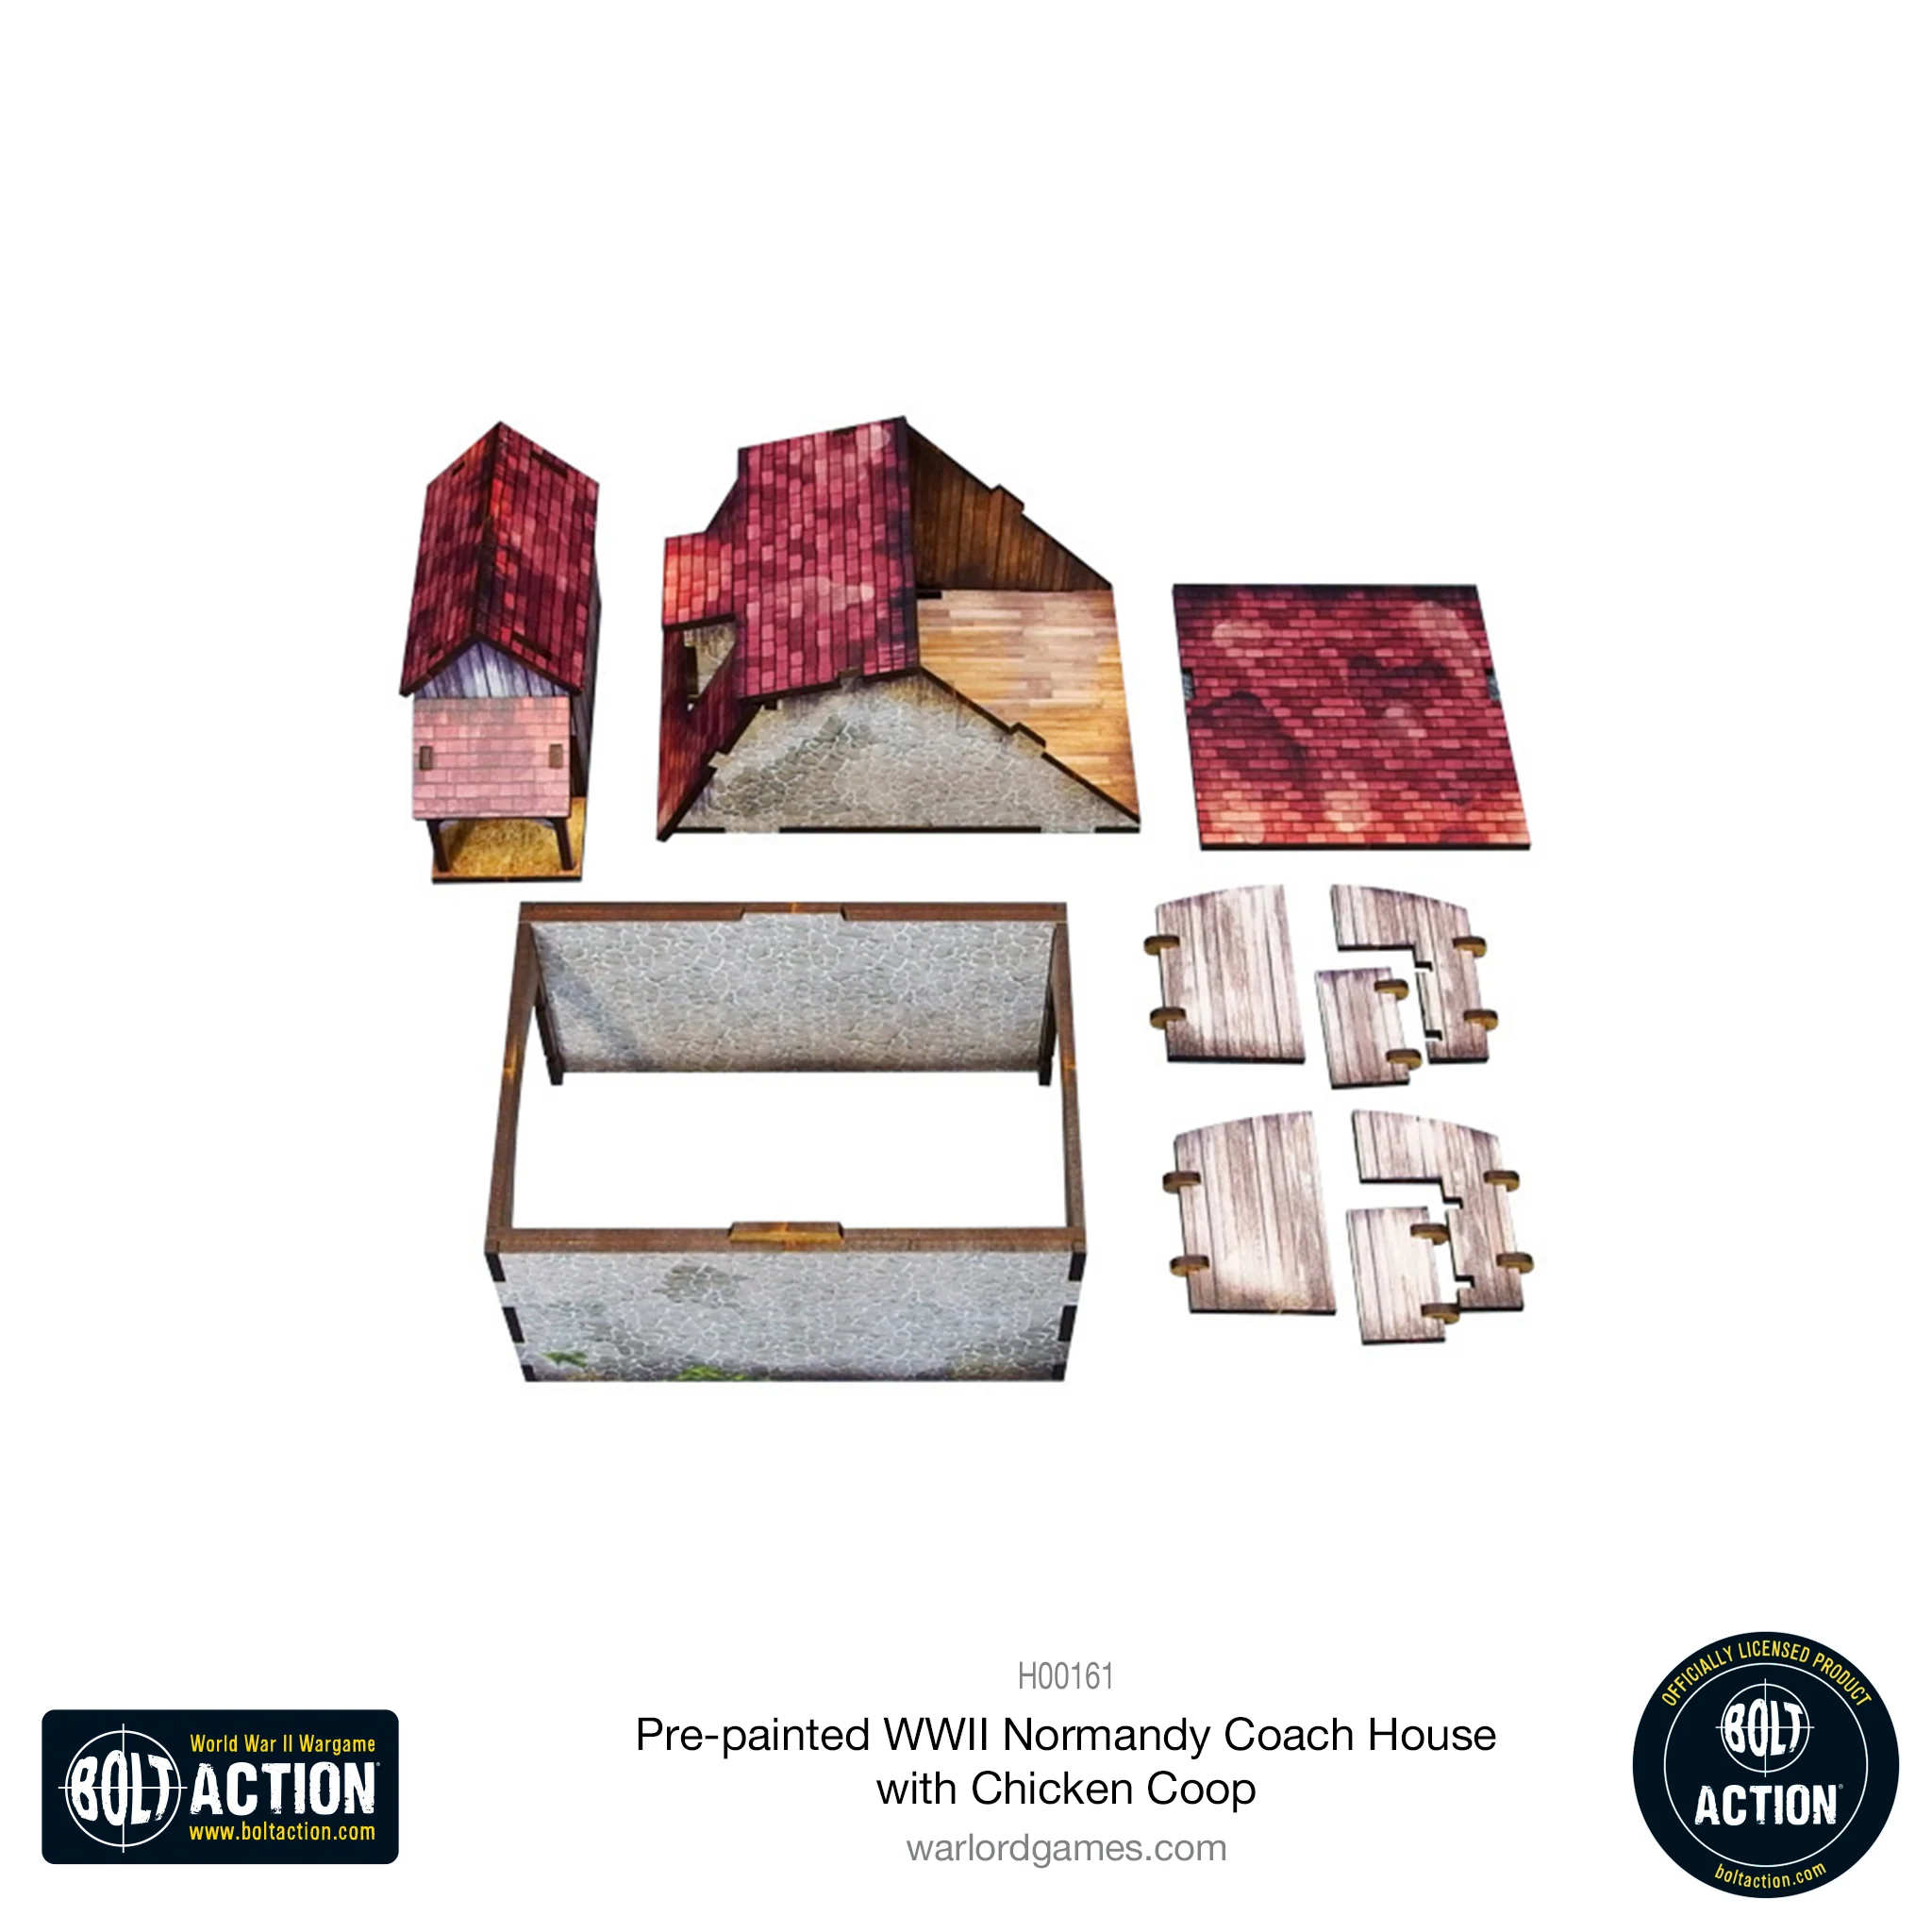 Bolt Action: Pre-Painted WWII Normandy Coach House With Chicken Coop-1711116719-l88H4.webp